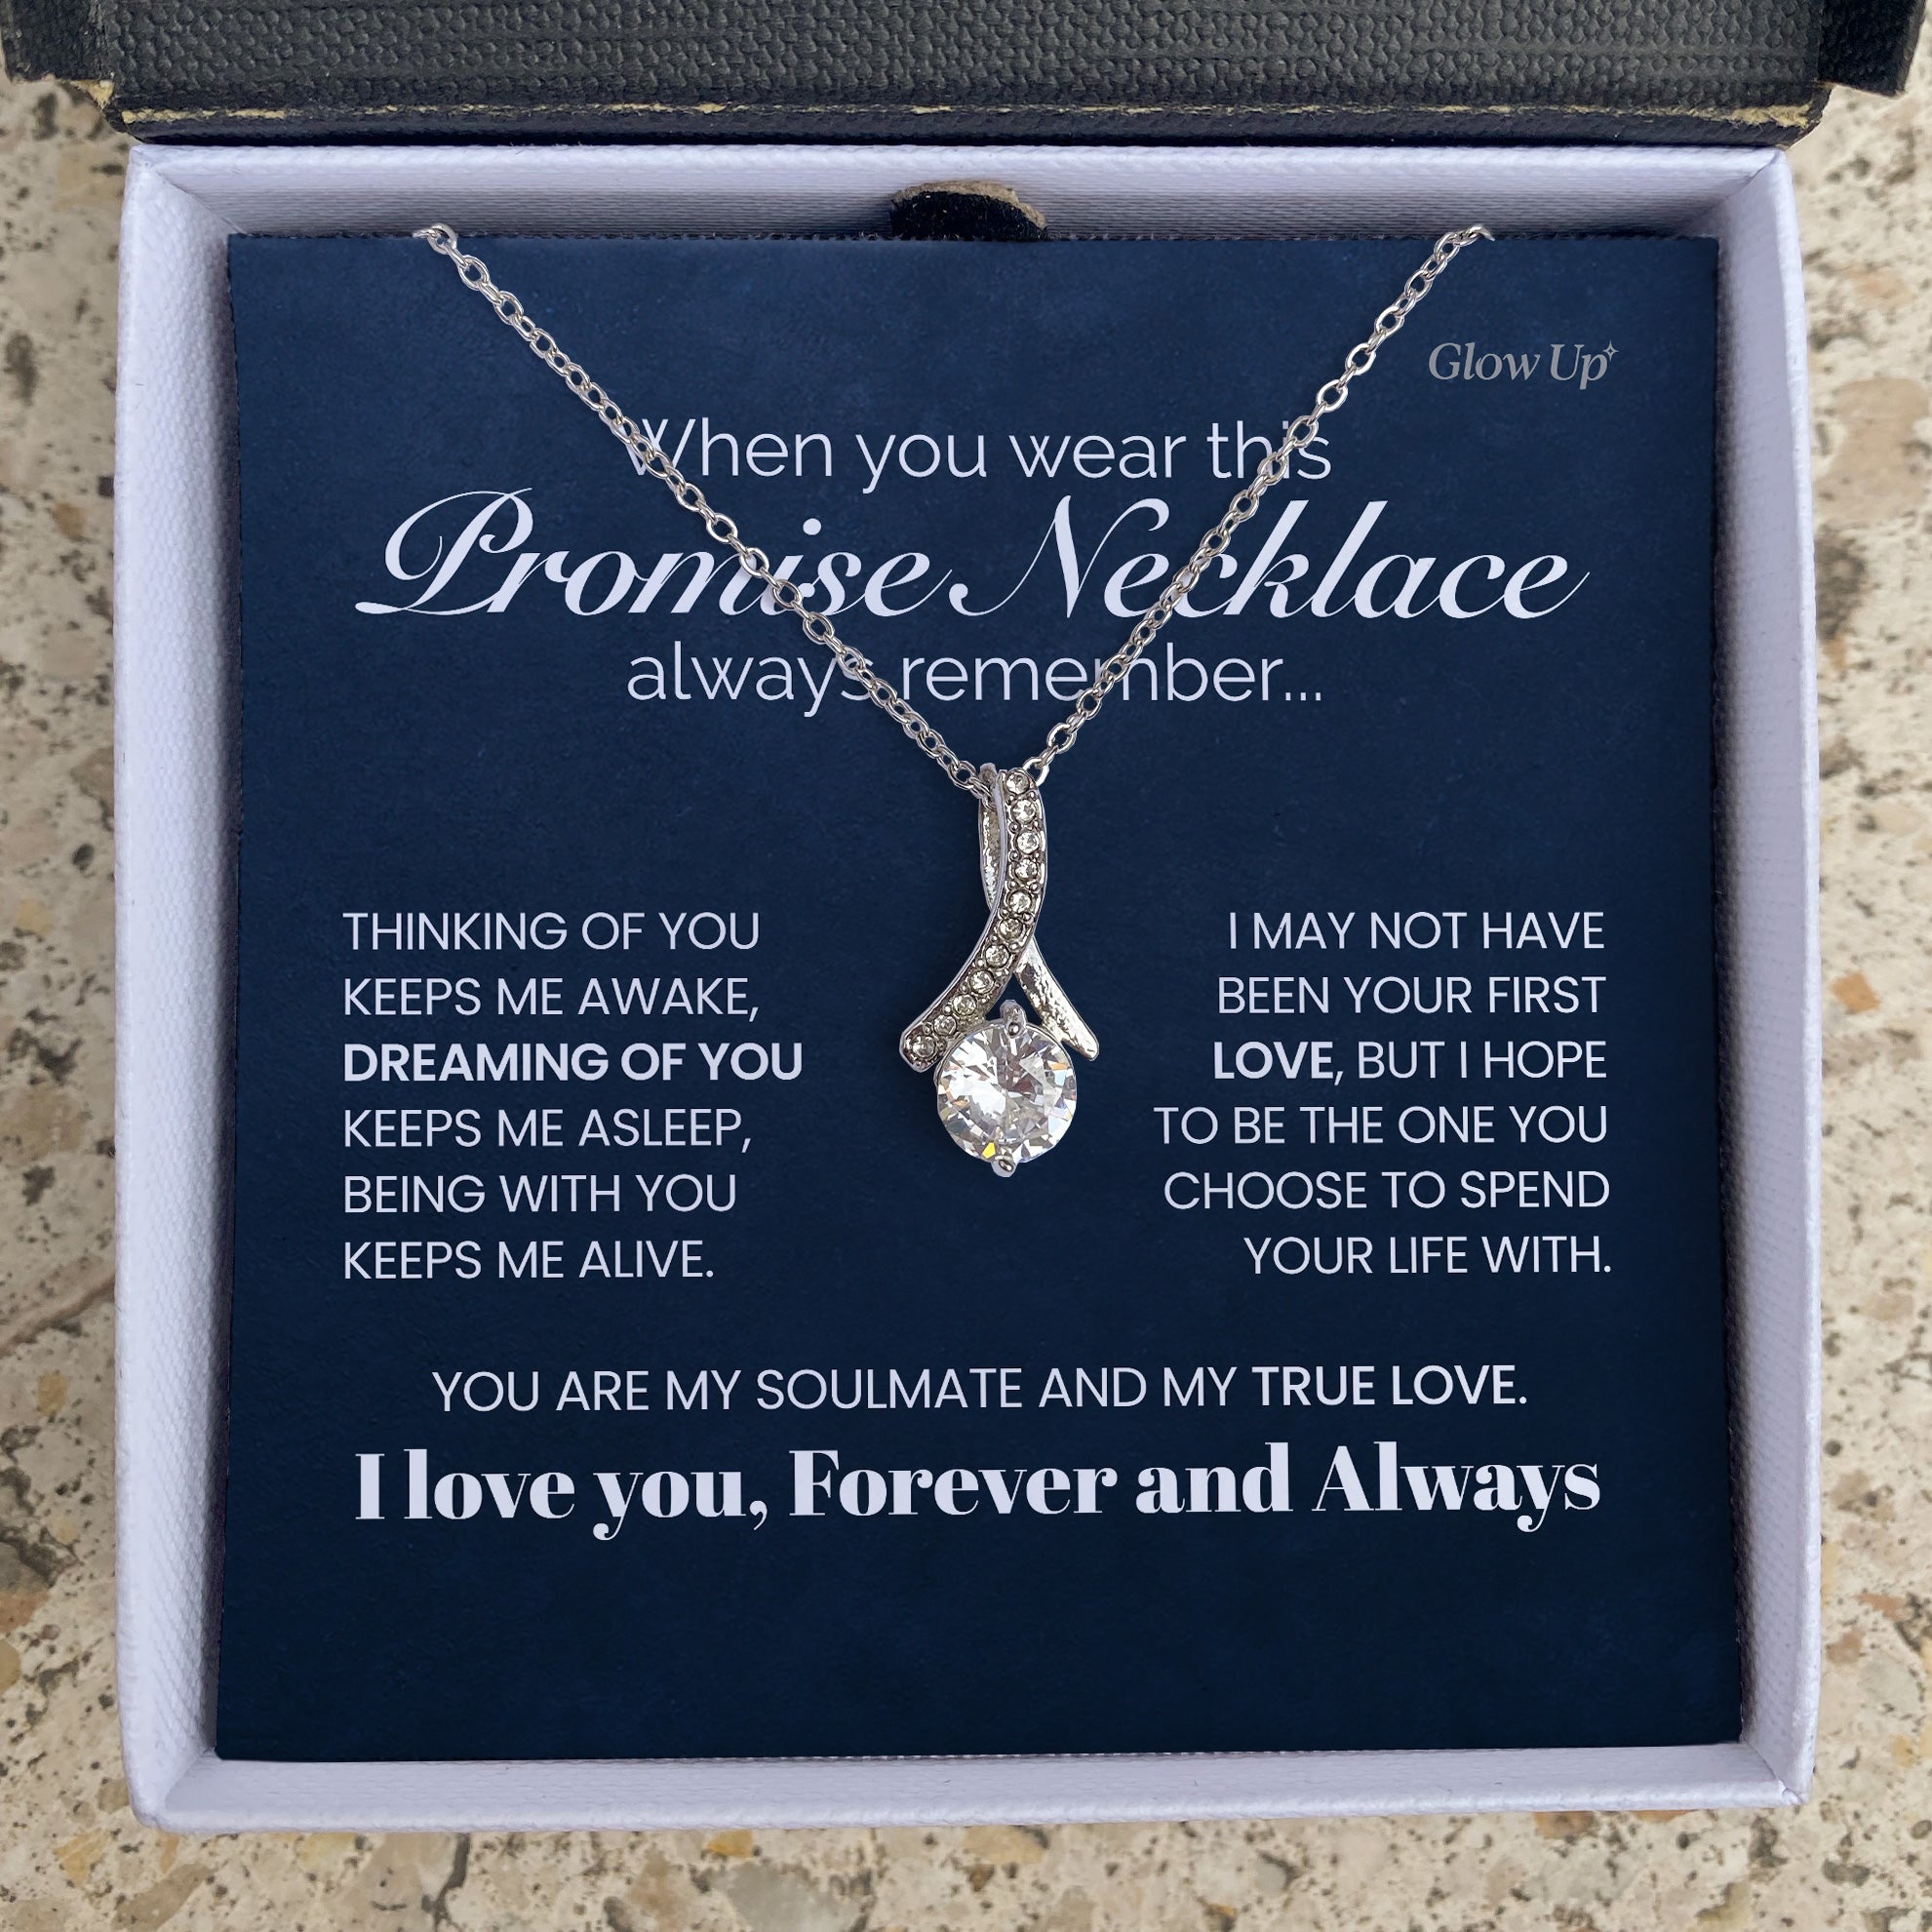 ShineOn Fulfillment Jewelry 14K White Gold Finish / Two-Toned Box Promise Necklace - When You Wear This Always Remember